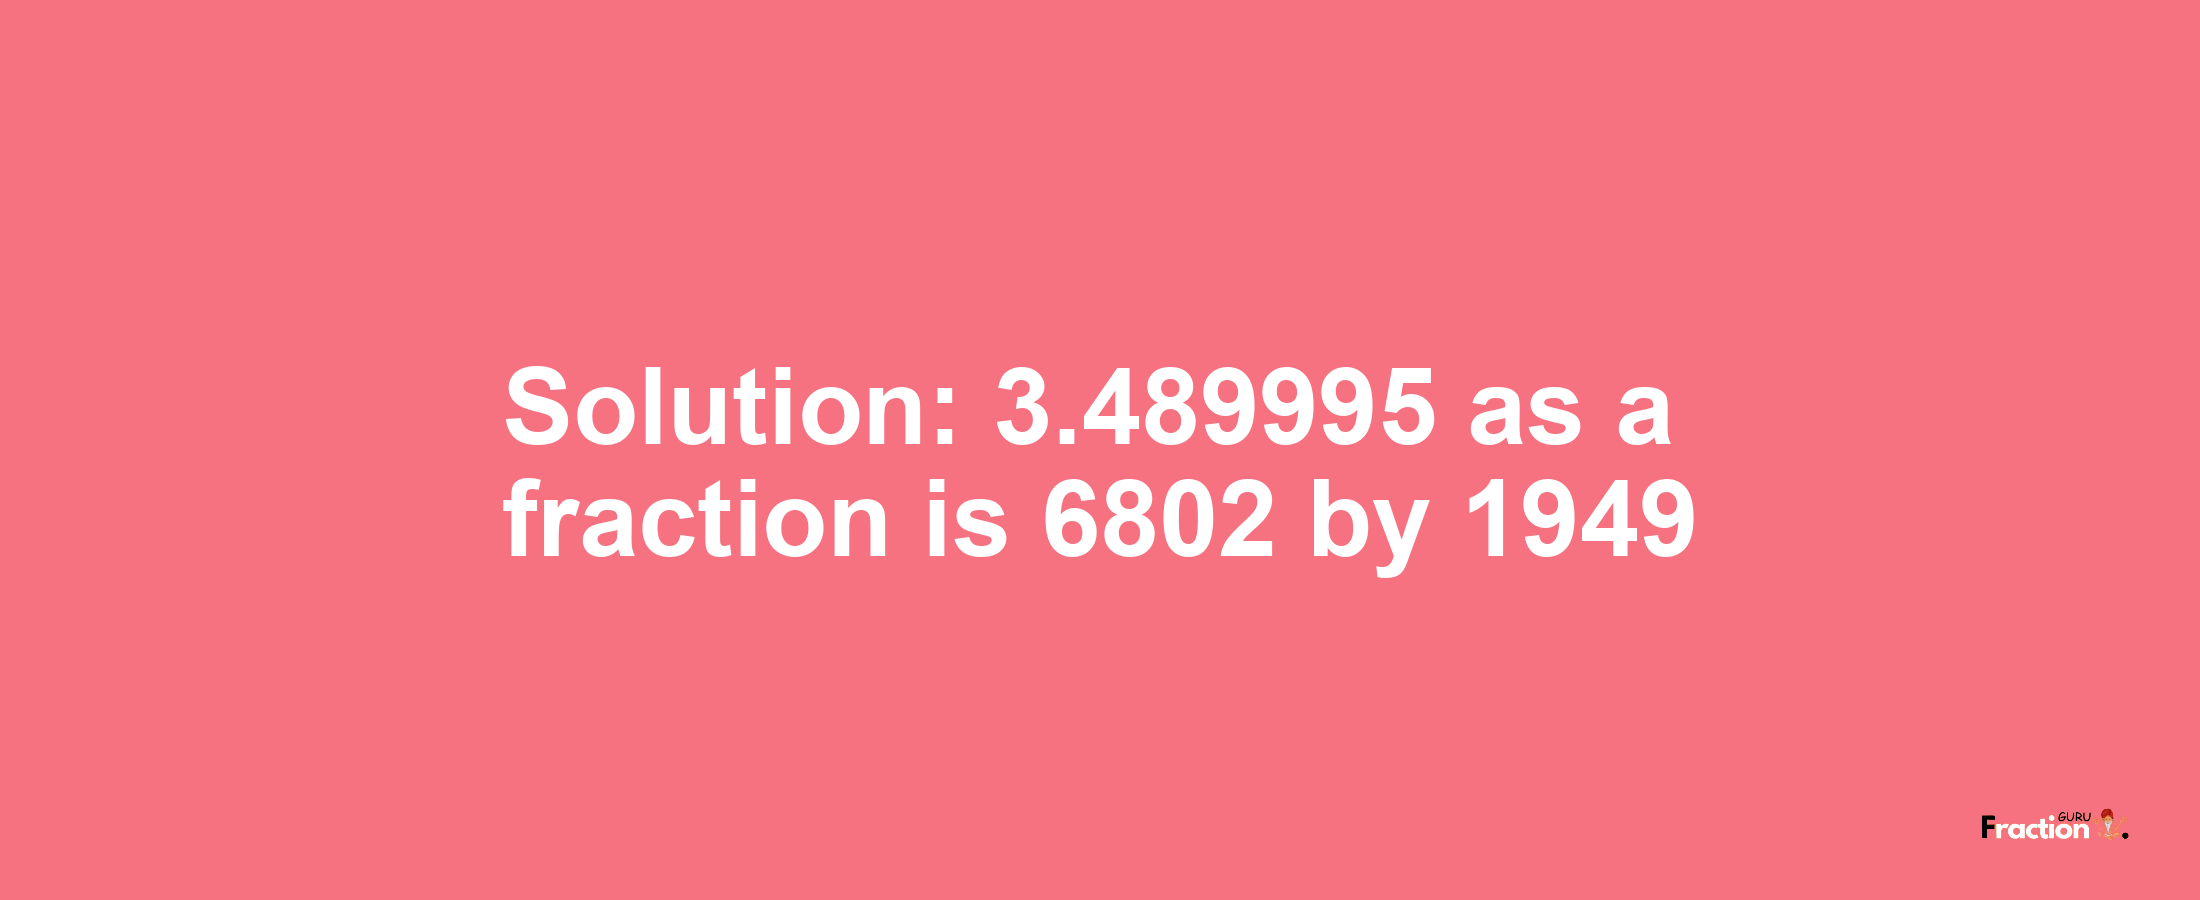 Solution:3.489995 as a fraction is 6802/1949